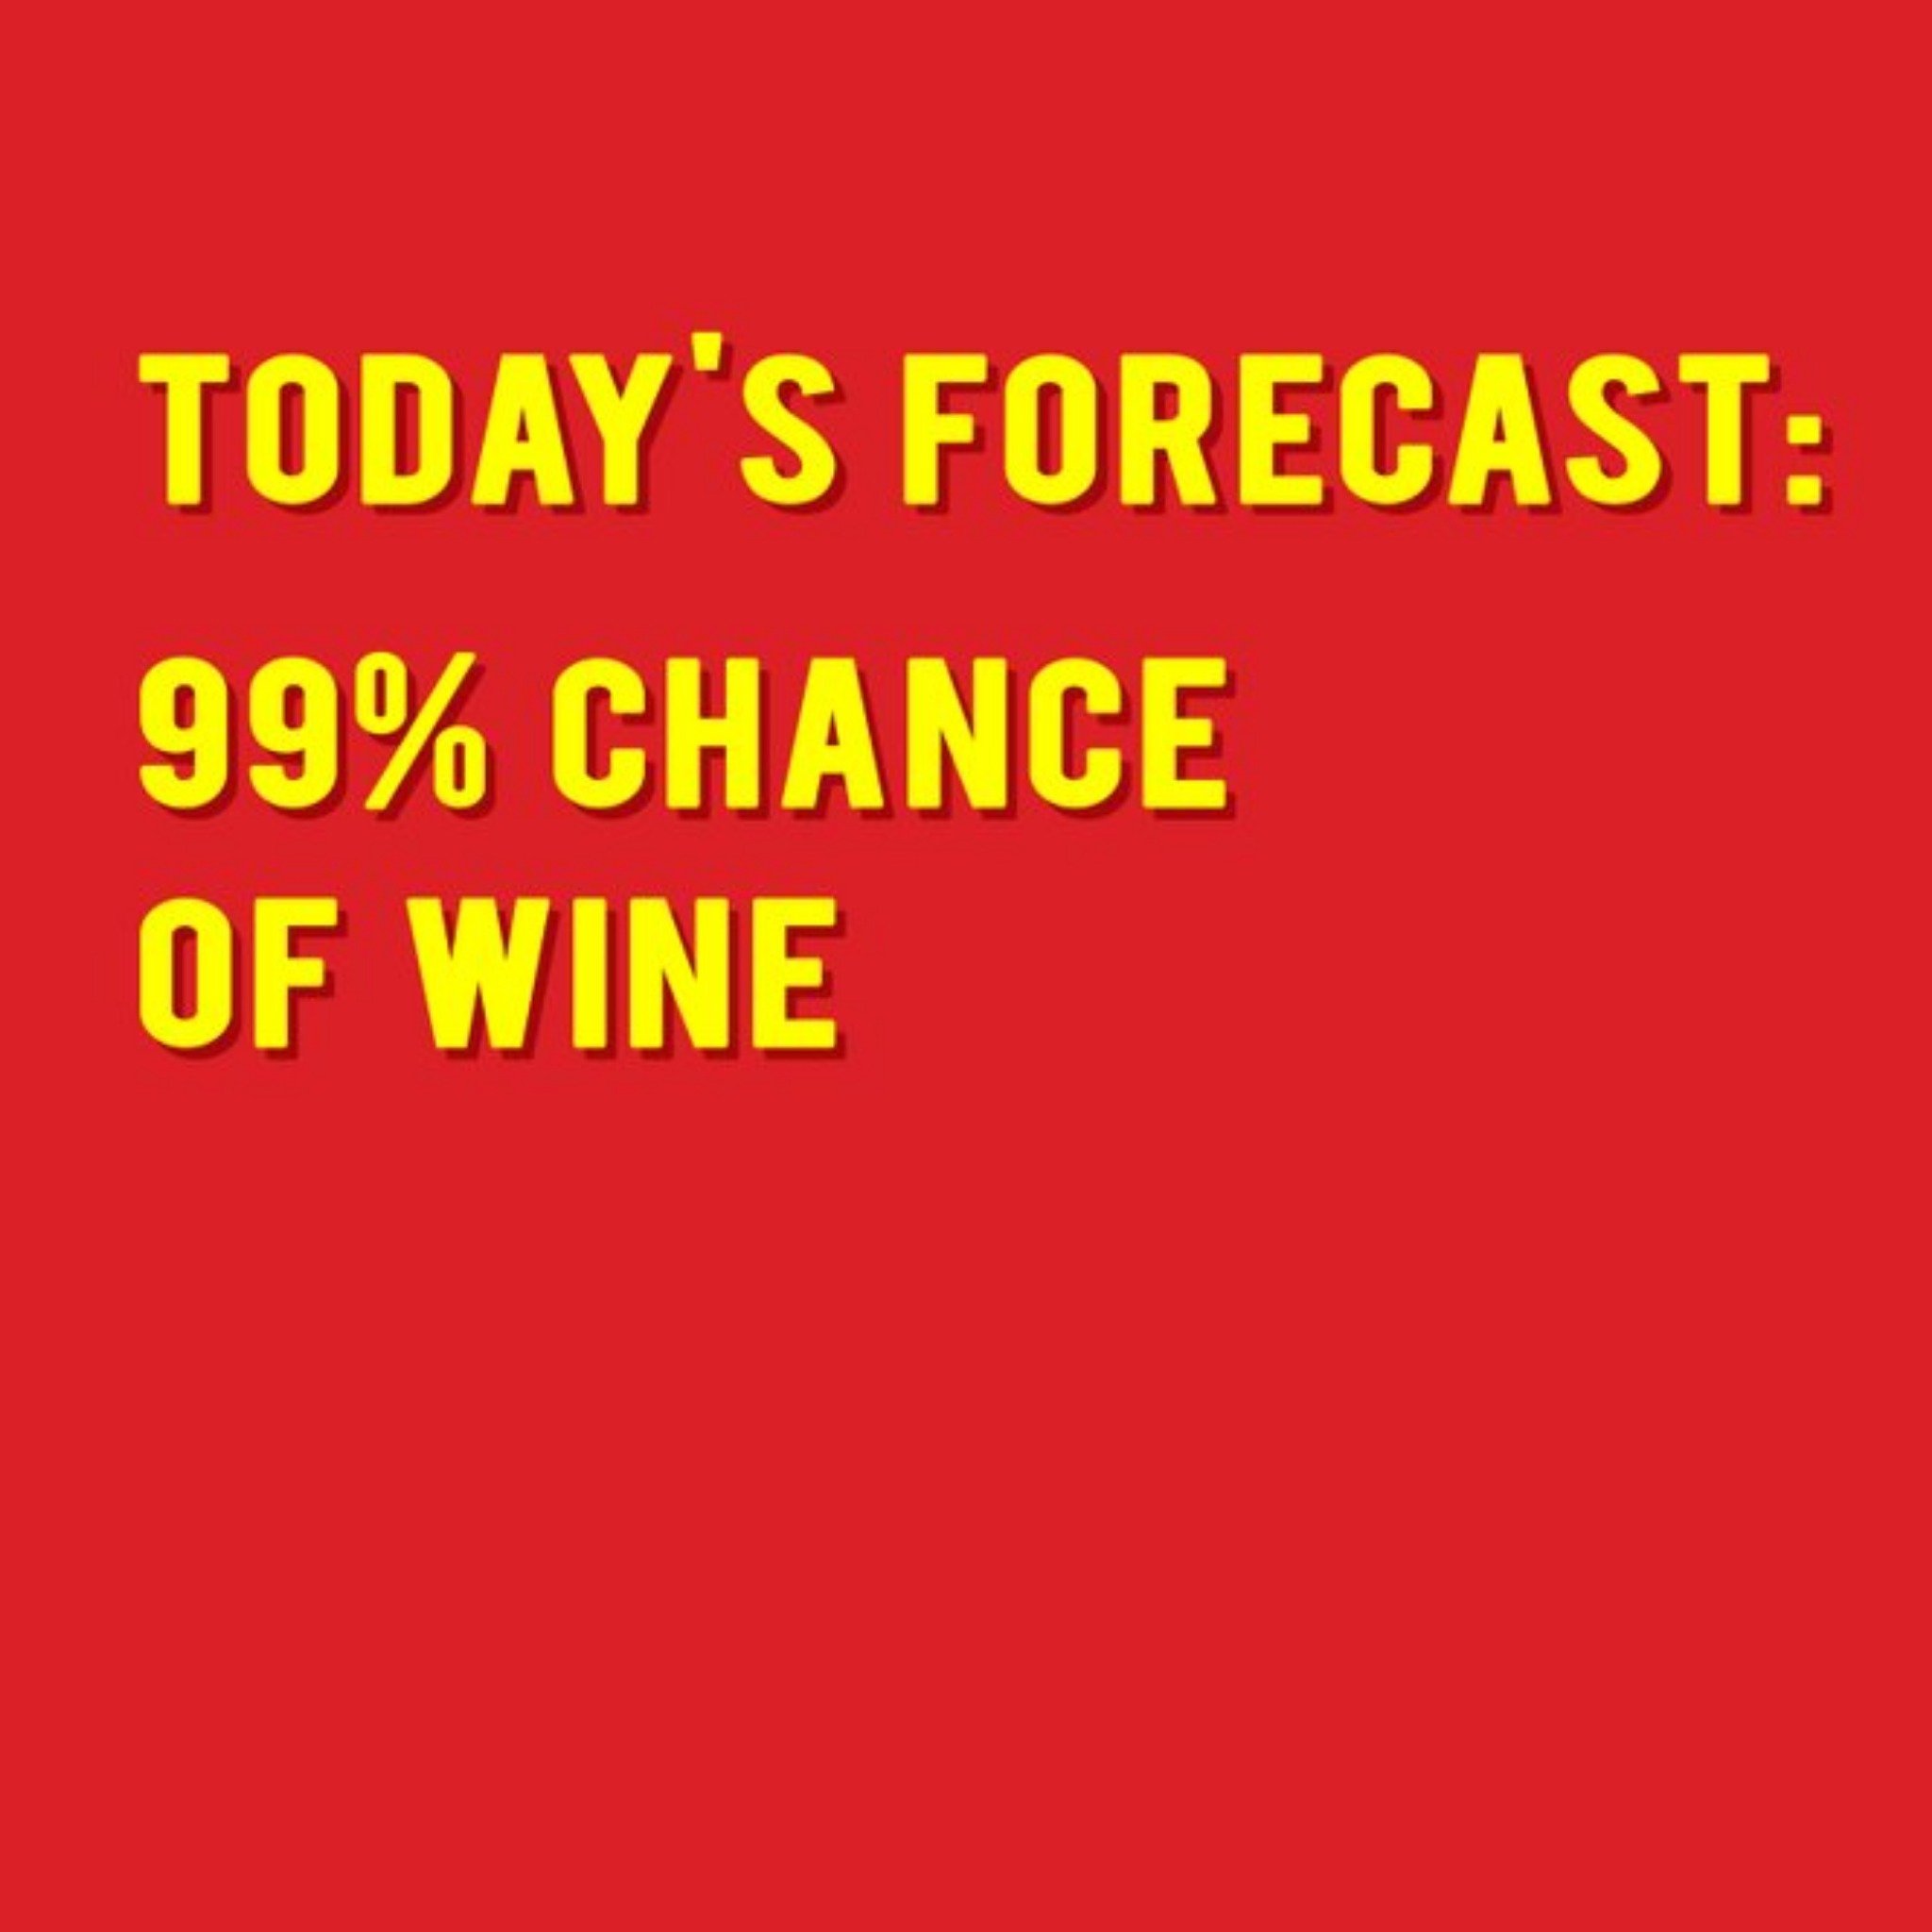 Moonpig Modern Typographical 99 Percent Chance Of Wine Card, Large